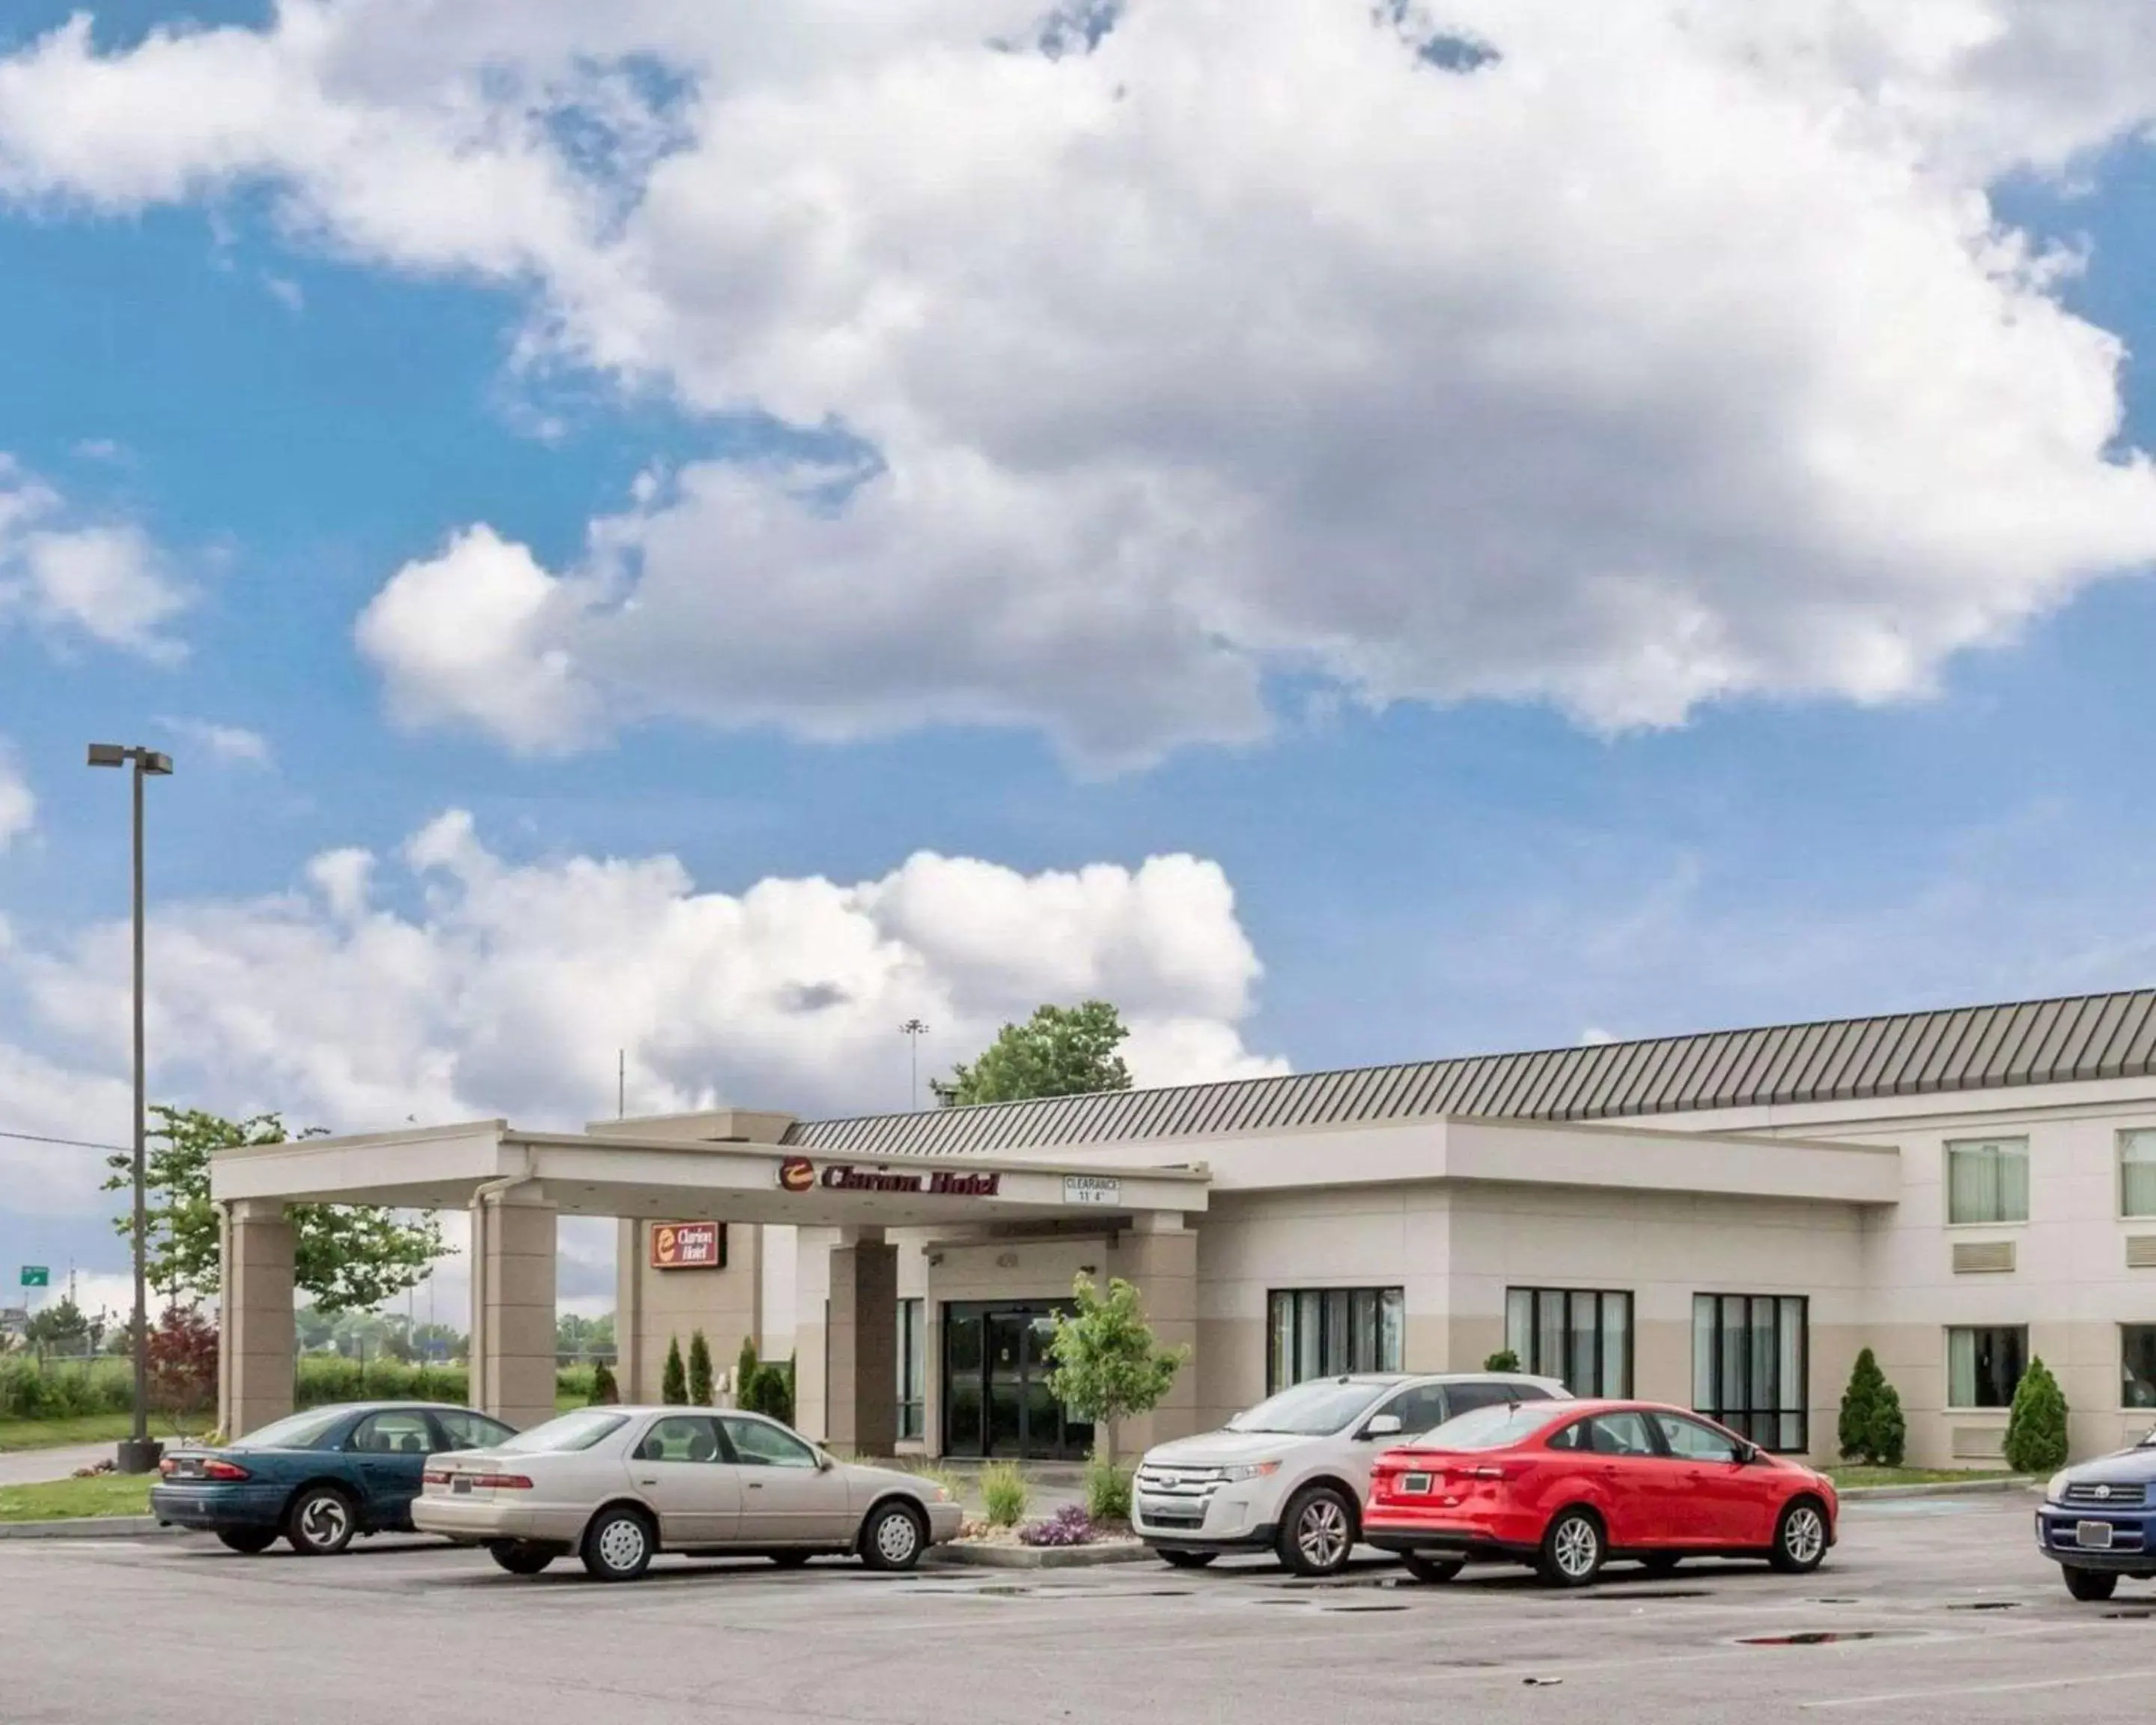 Property Building in Clarion Hotel Beachwood-Cleveland